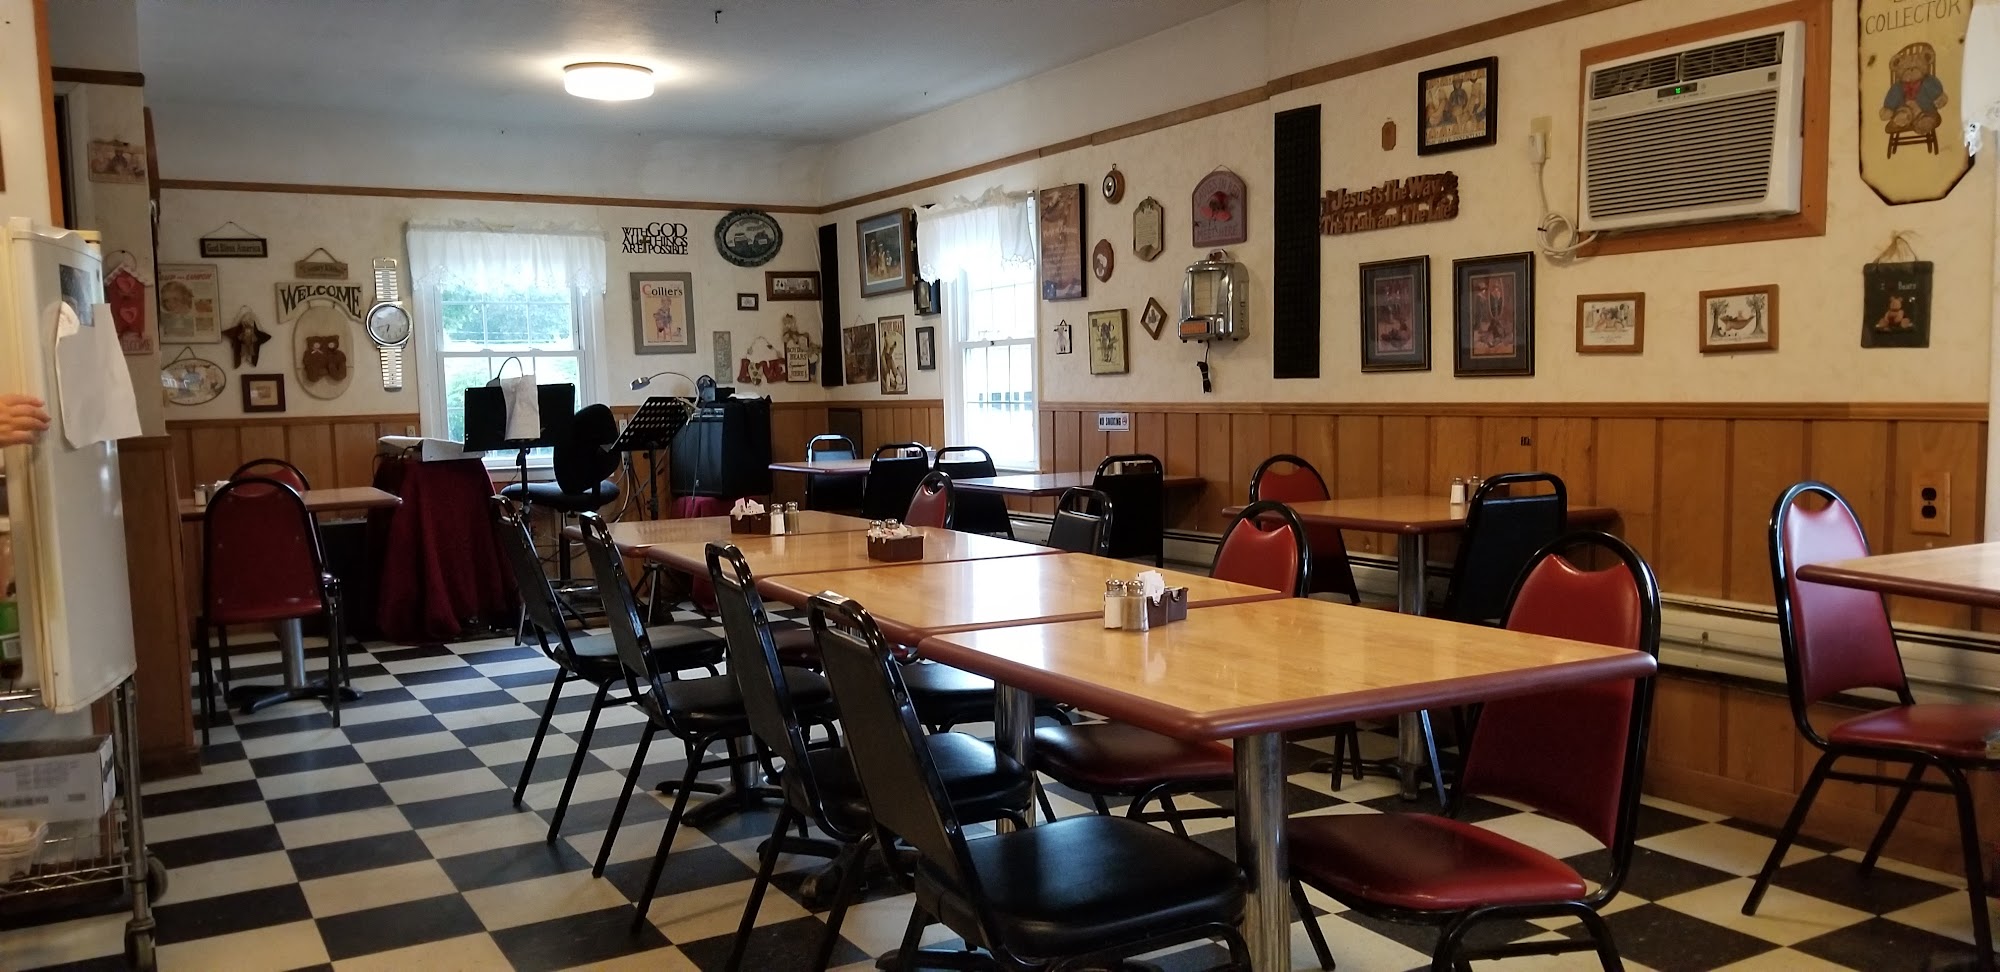 Whitney Point Country Kitchen